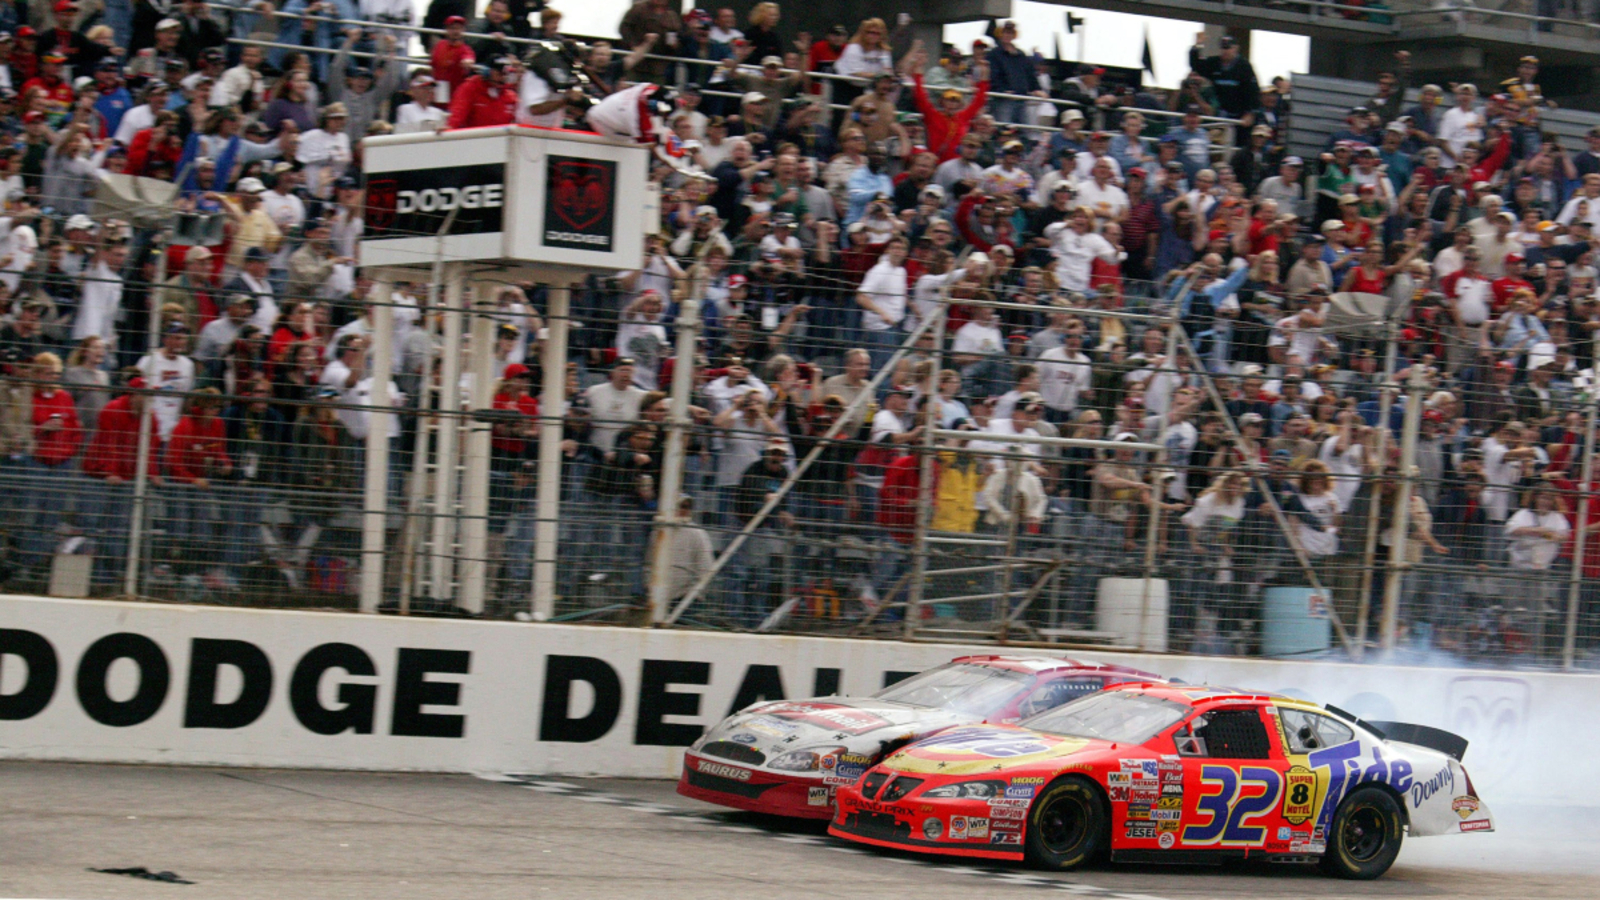 Darlington Throwback: Ricky Craven, Kurt Busch duel in closest finish in NASCAR history